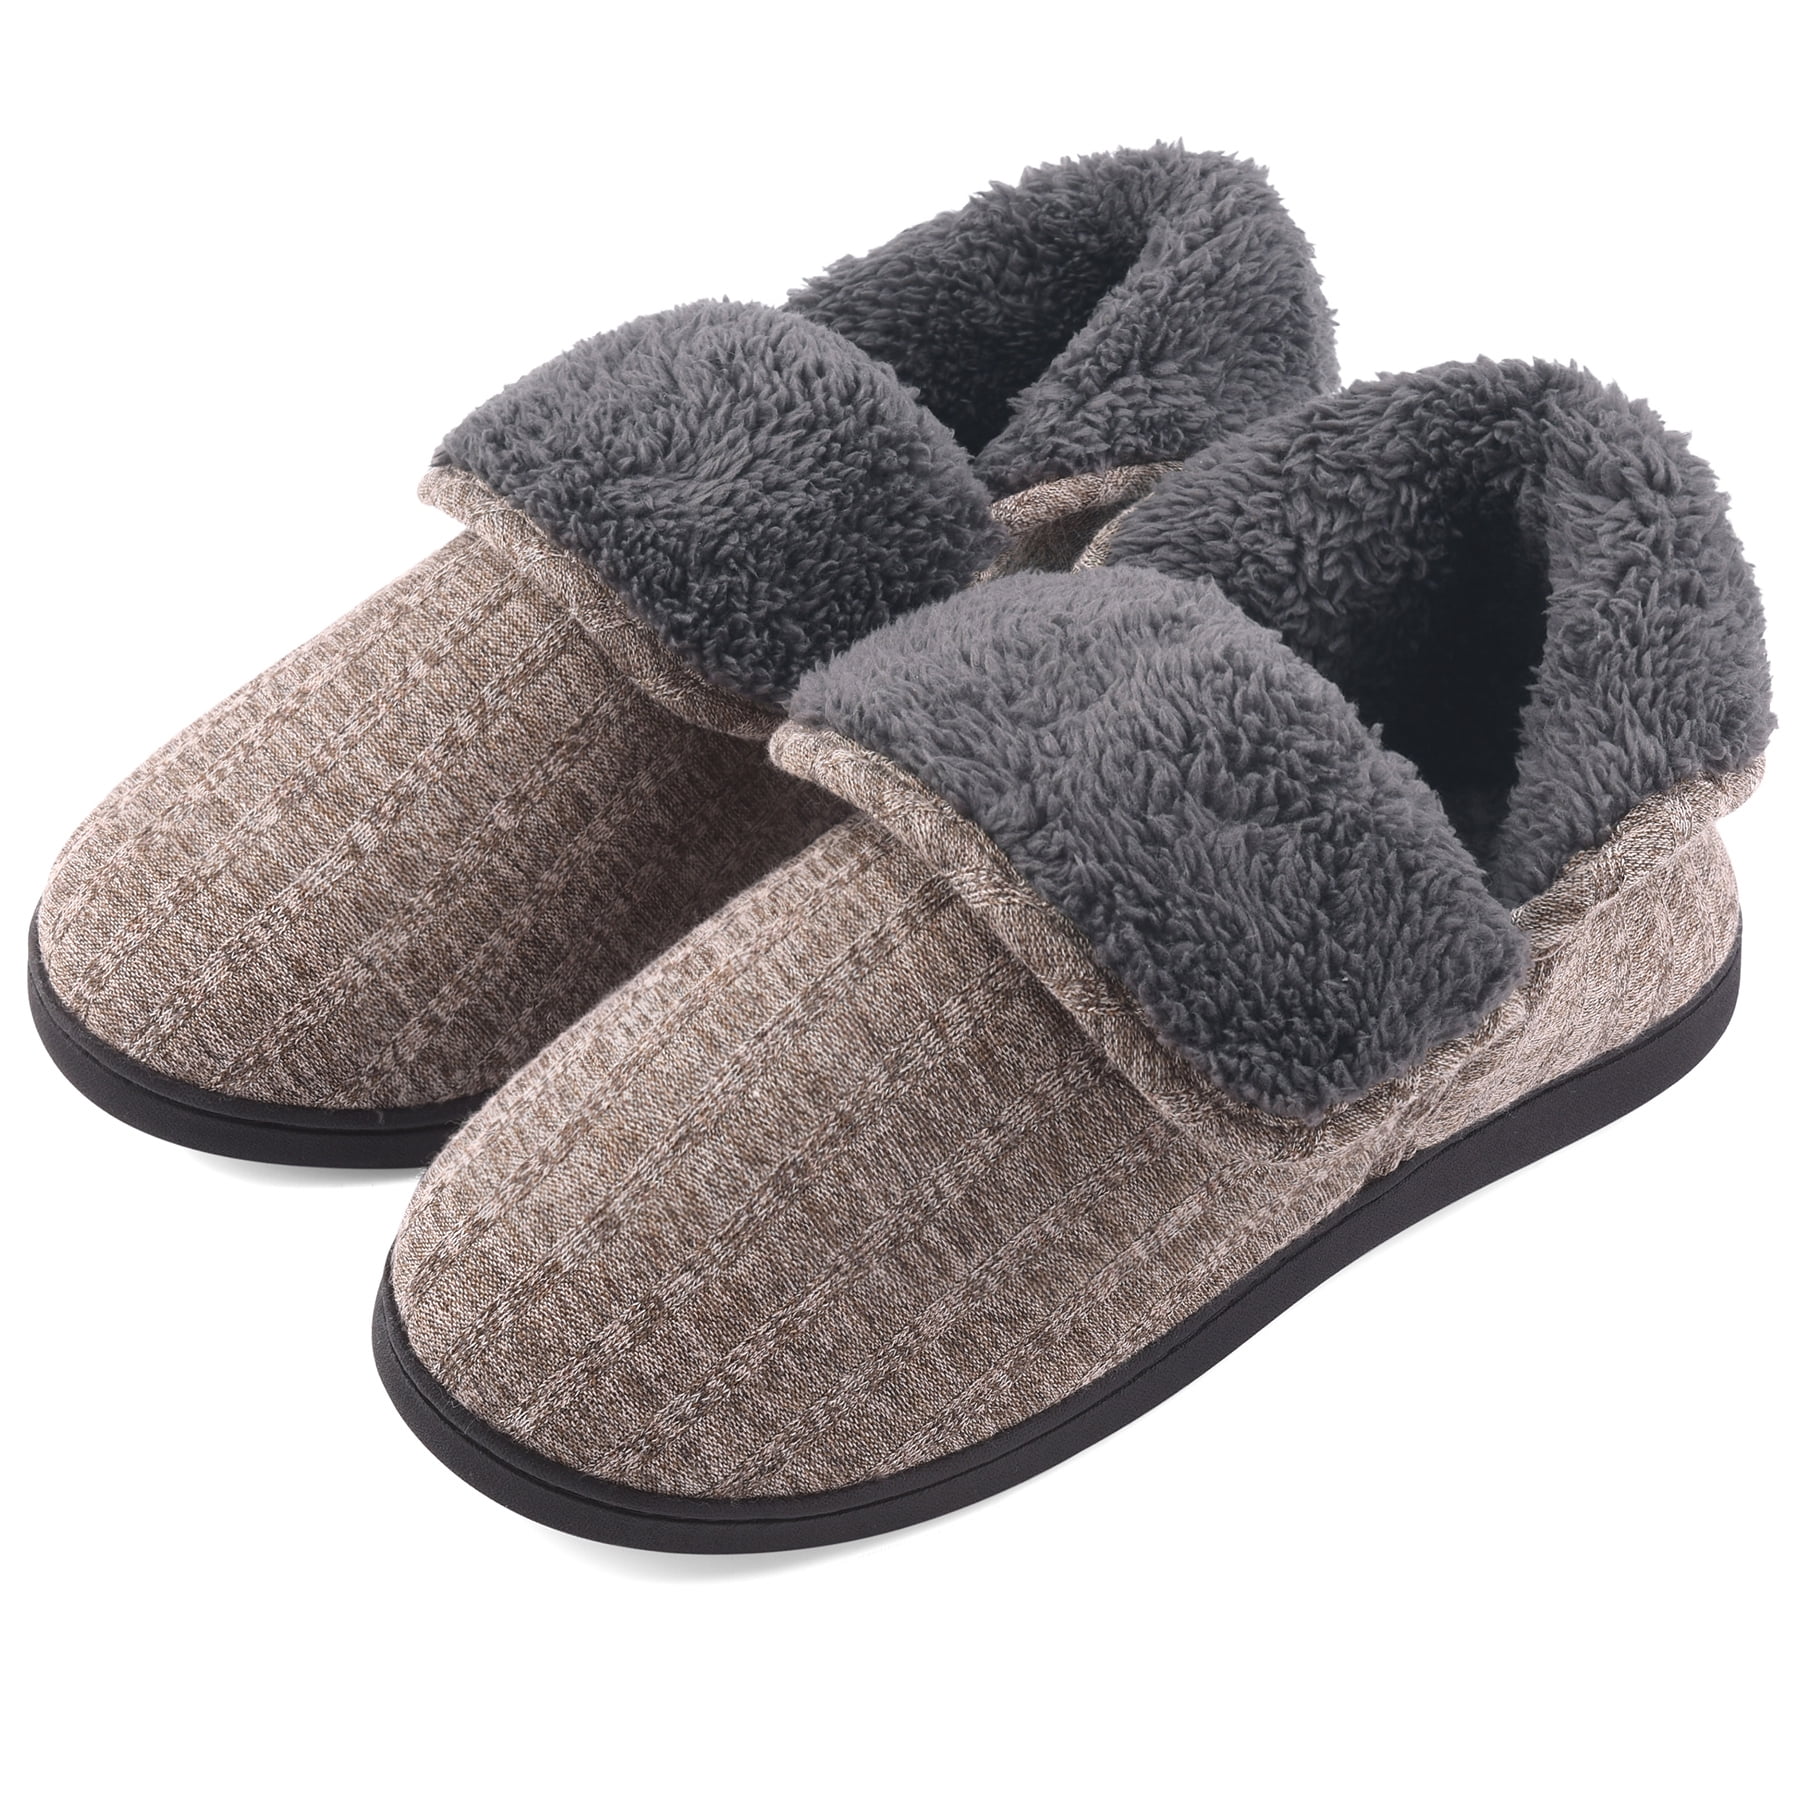 VONMAY Male Fuzzy Slippers Memory Foam Adult Booties Brown